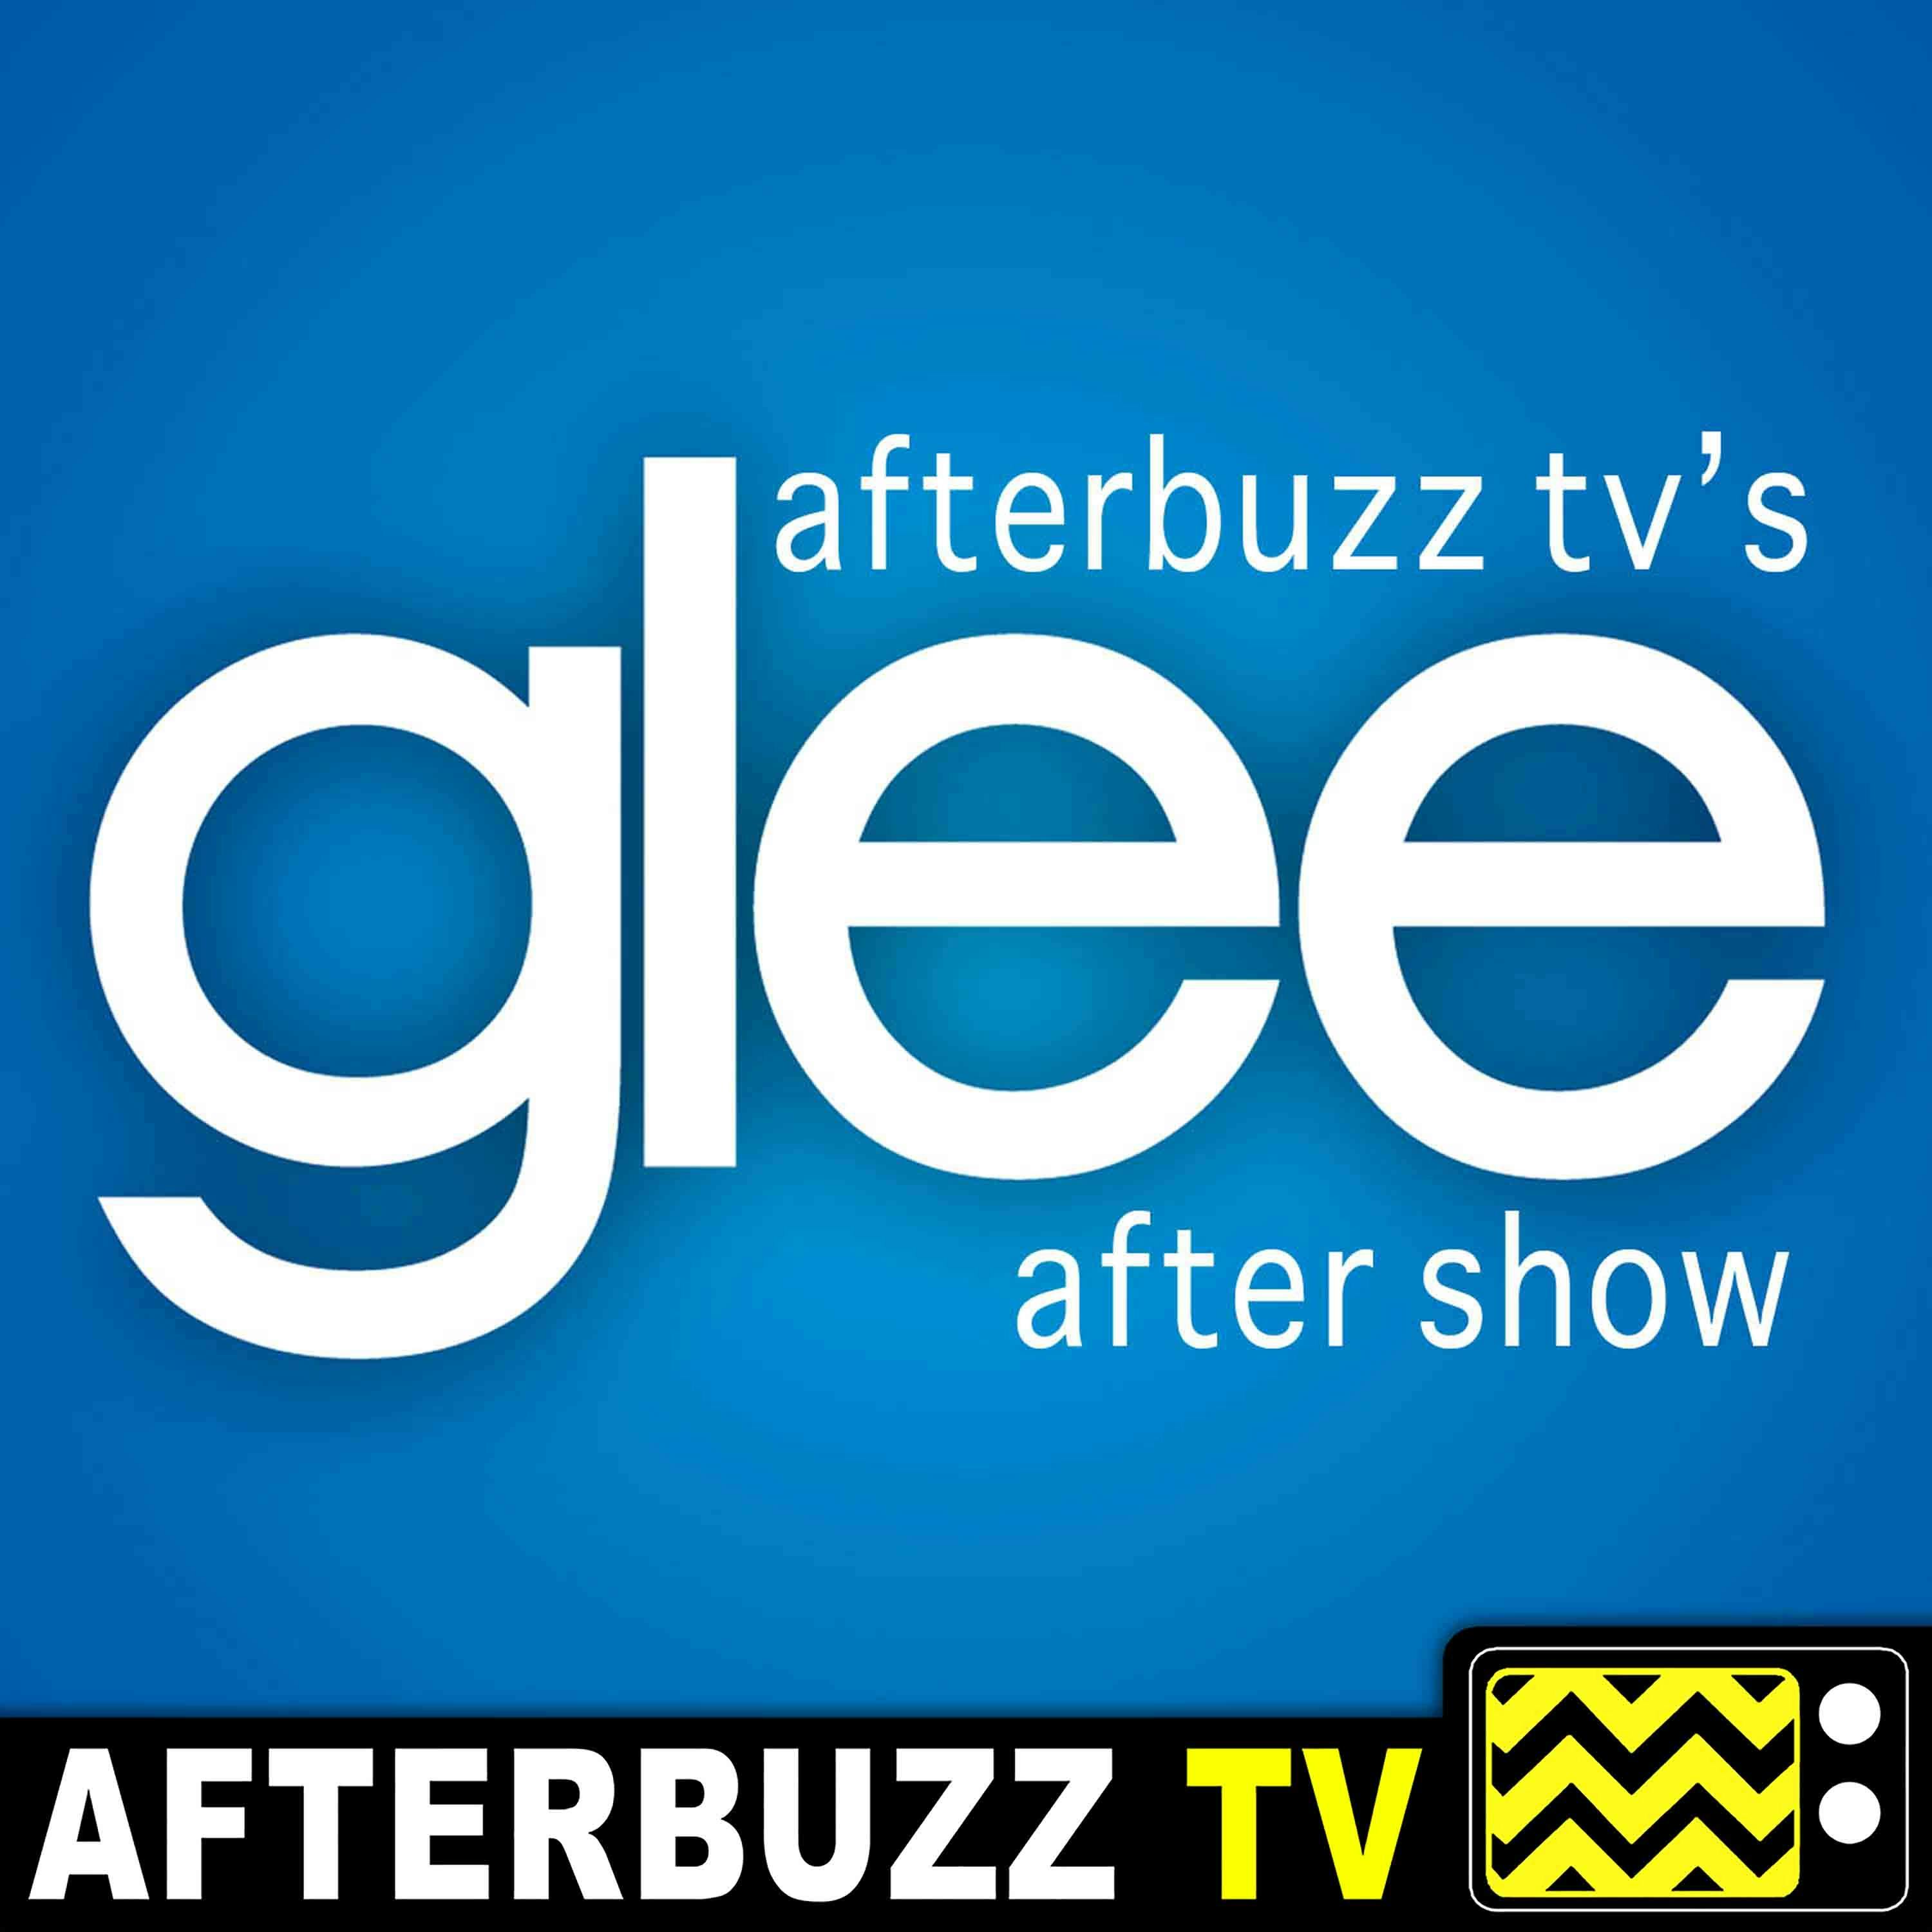 Glee S:6 | Child Star E:9 | AfterBuzz TV AfterShow